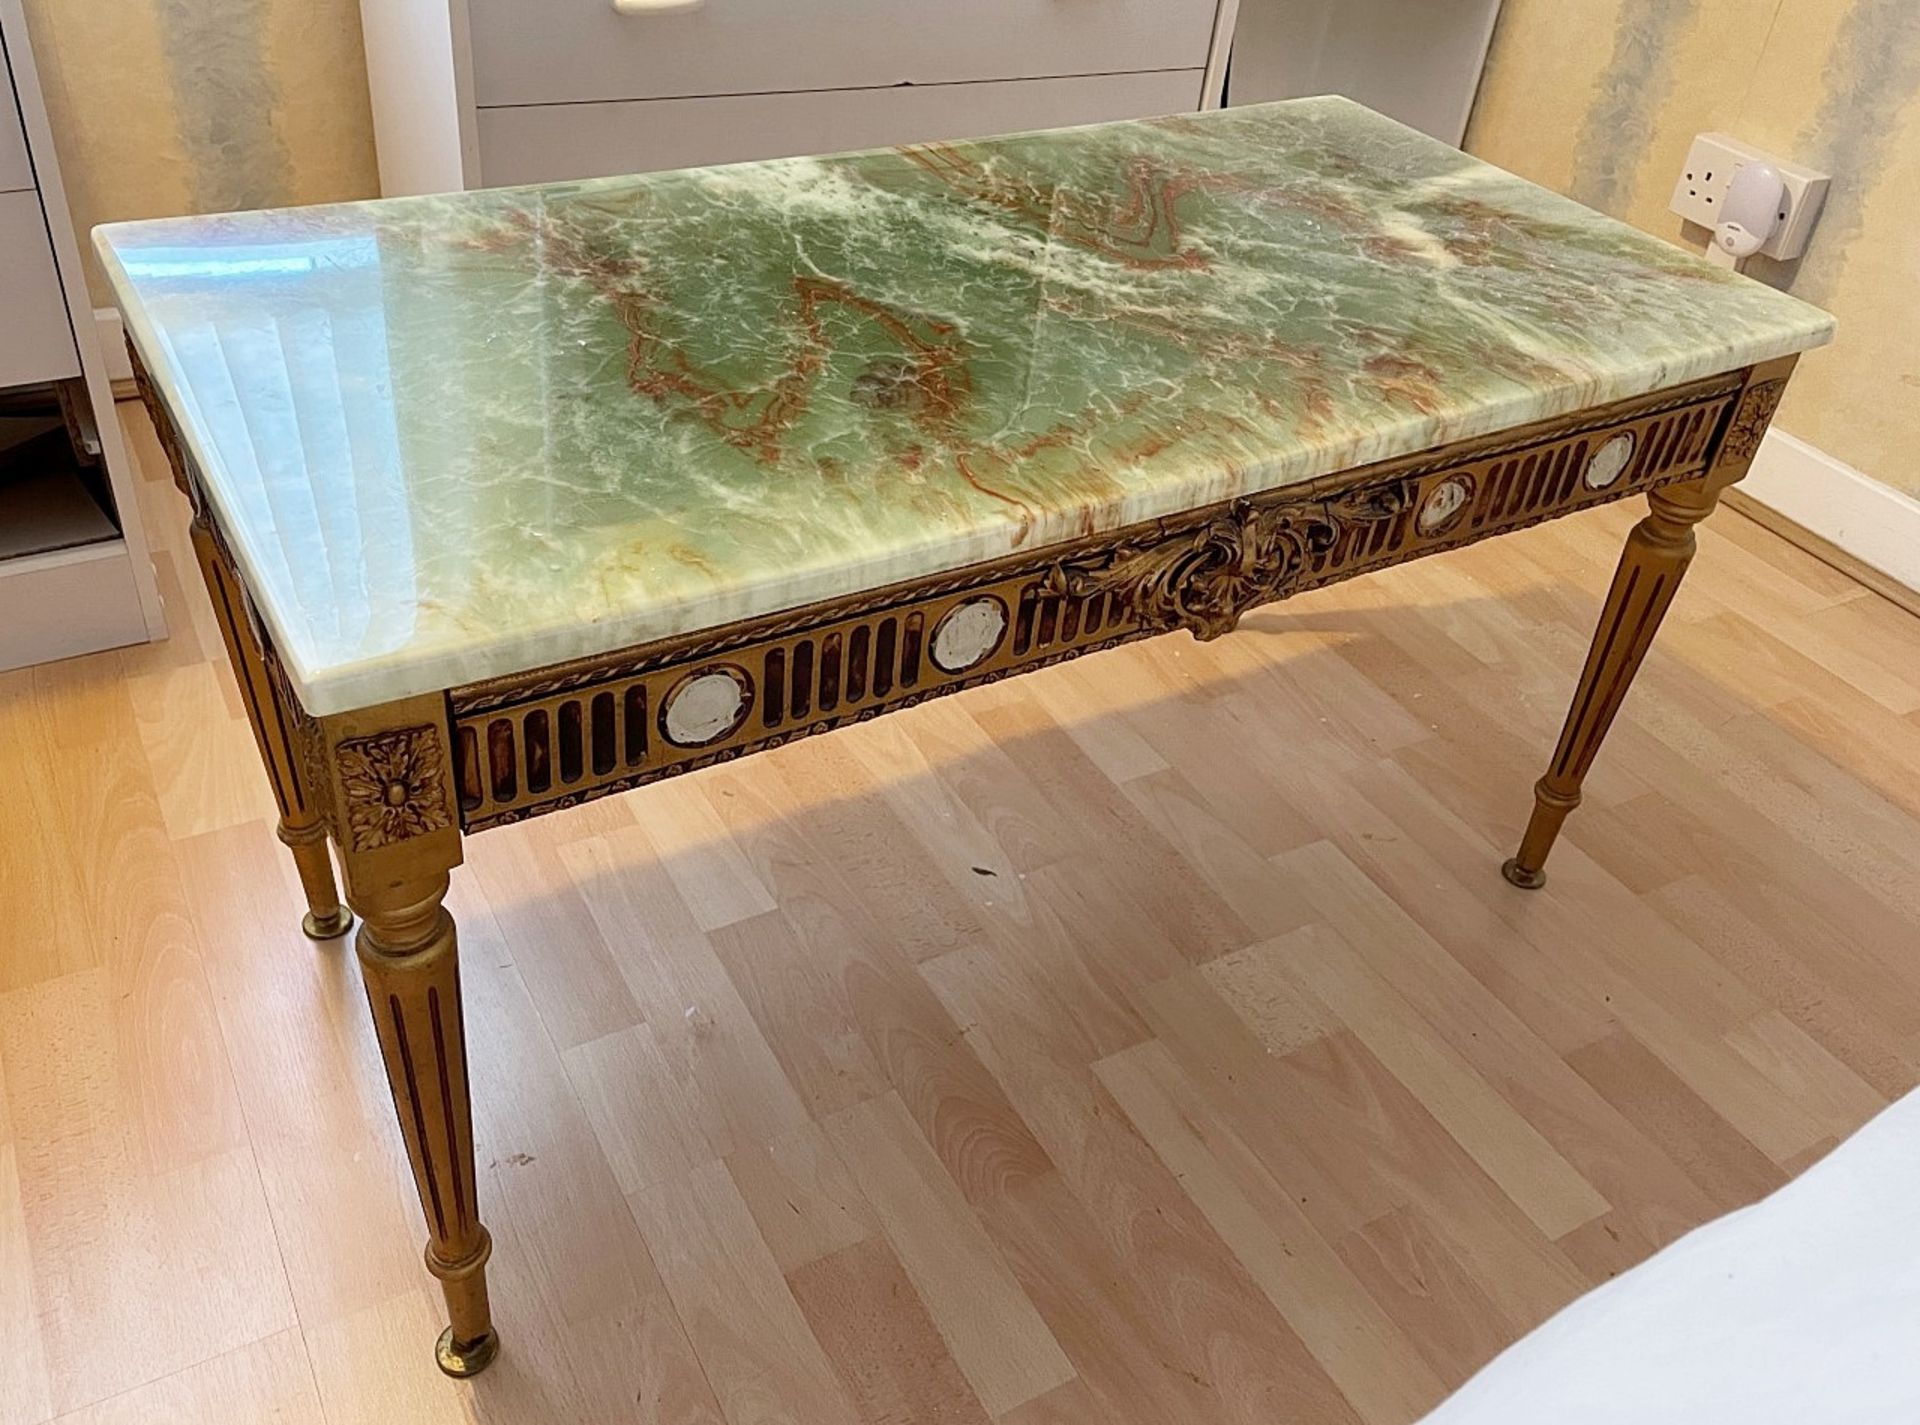 1 x Rectangular Period-style Marble Topped Table - From An Exclusive Property In Leeds - No VAT on - Image 2 of 5